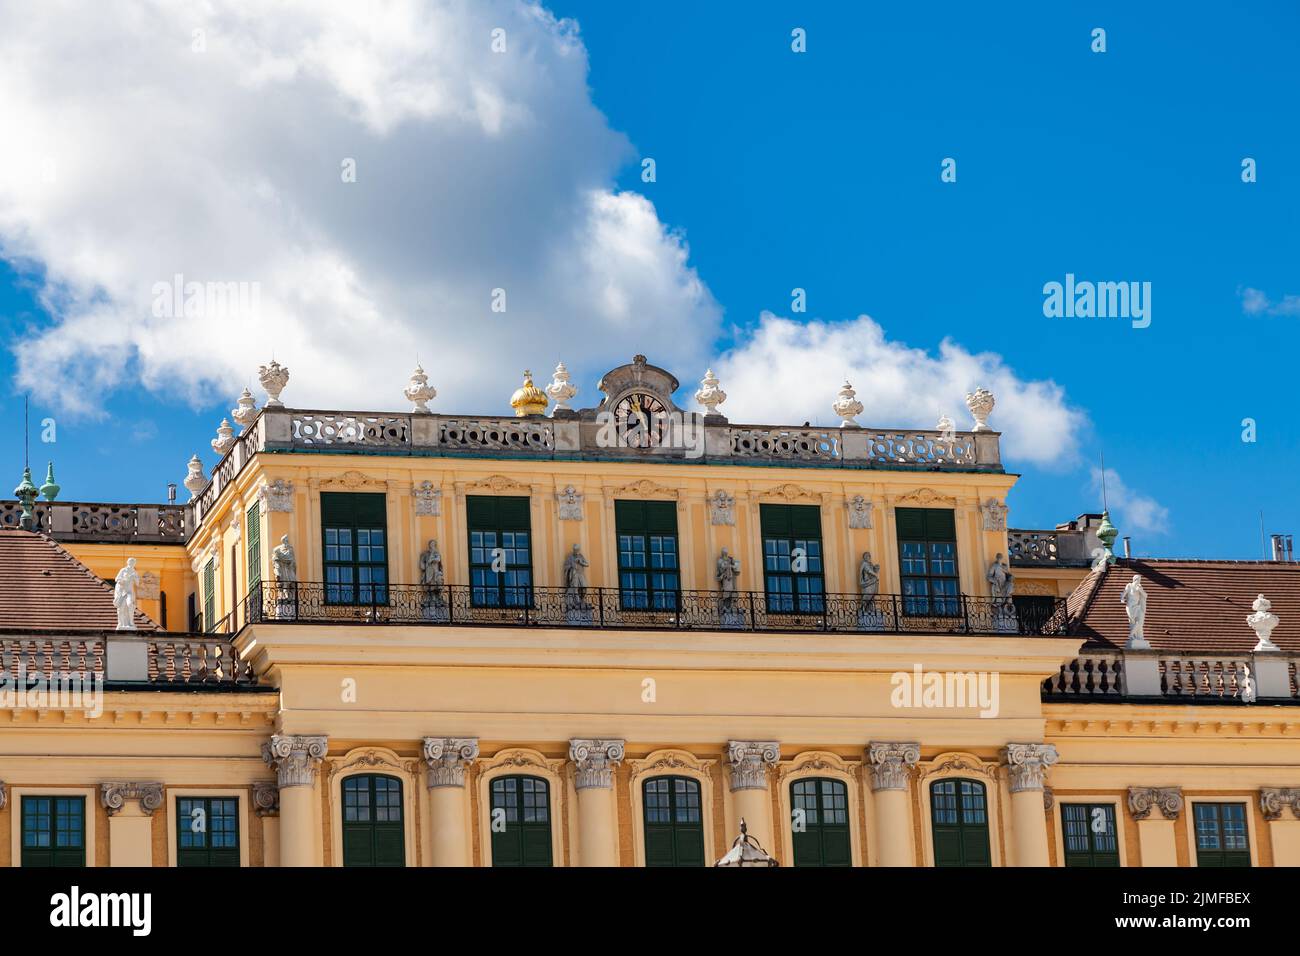 View of beautiful sculpture decorated on the roofline of Schonbrunn palace. Stock Photo